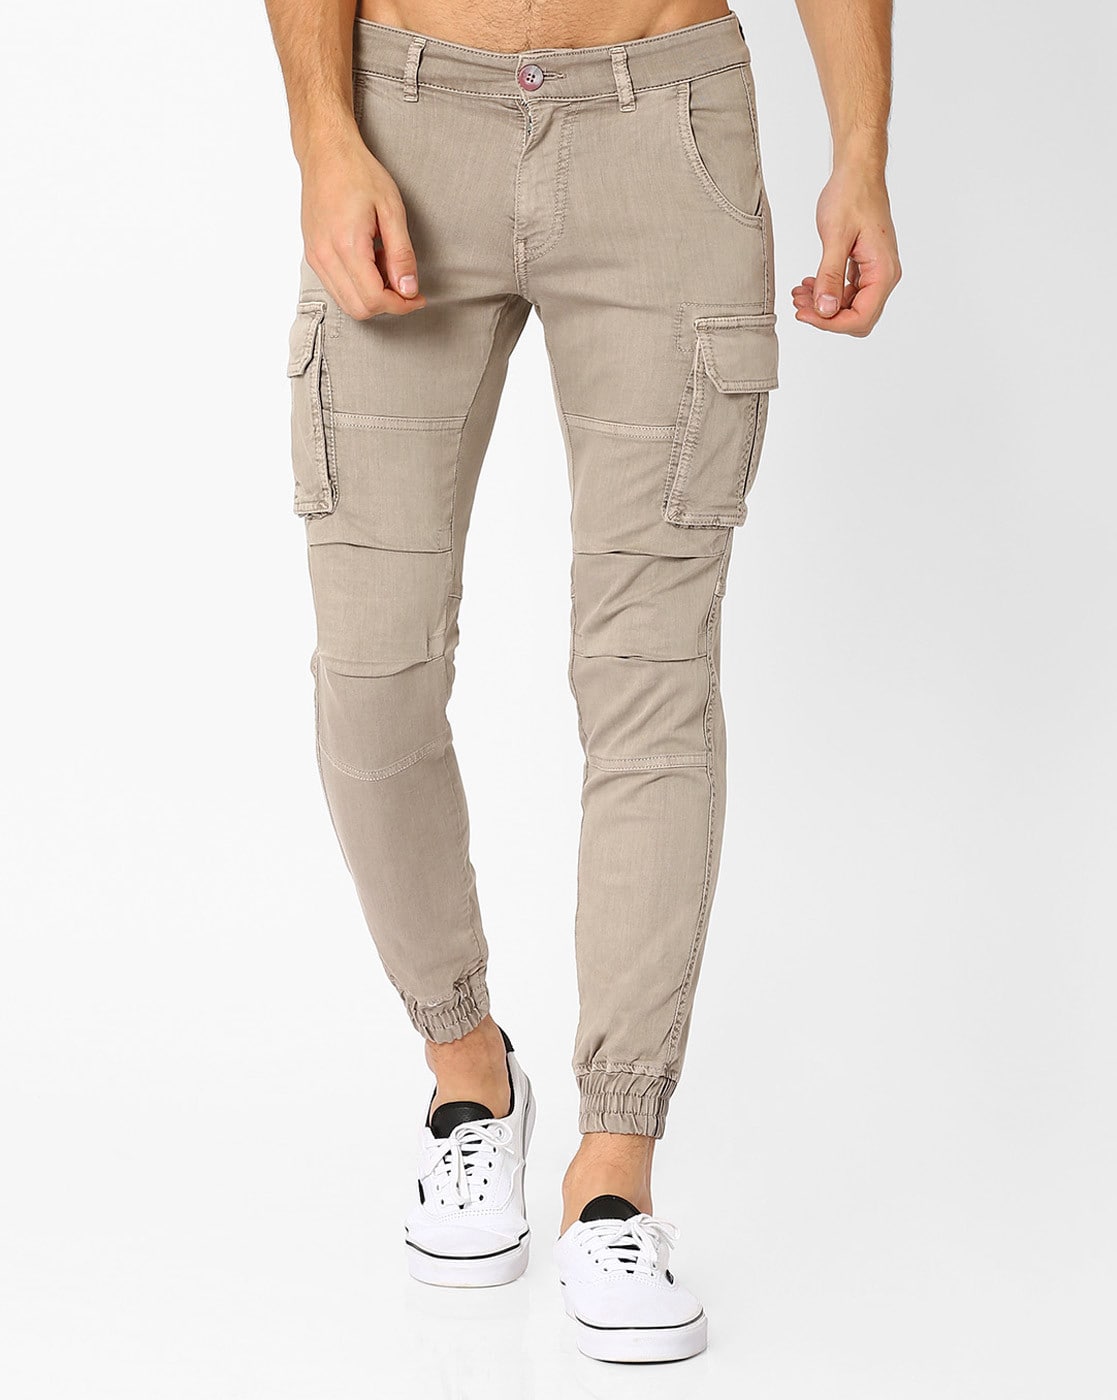 Buy Black Trousers & Pants for Women by GAS Online | Ajio.com